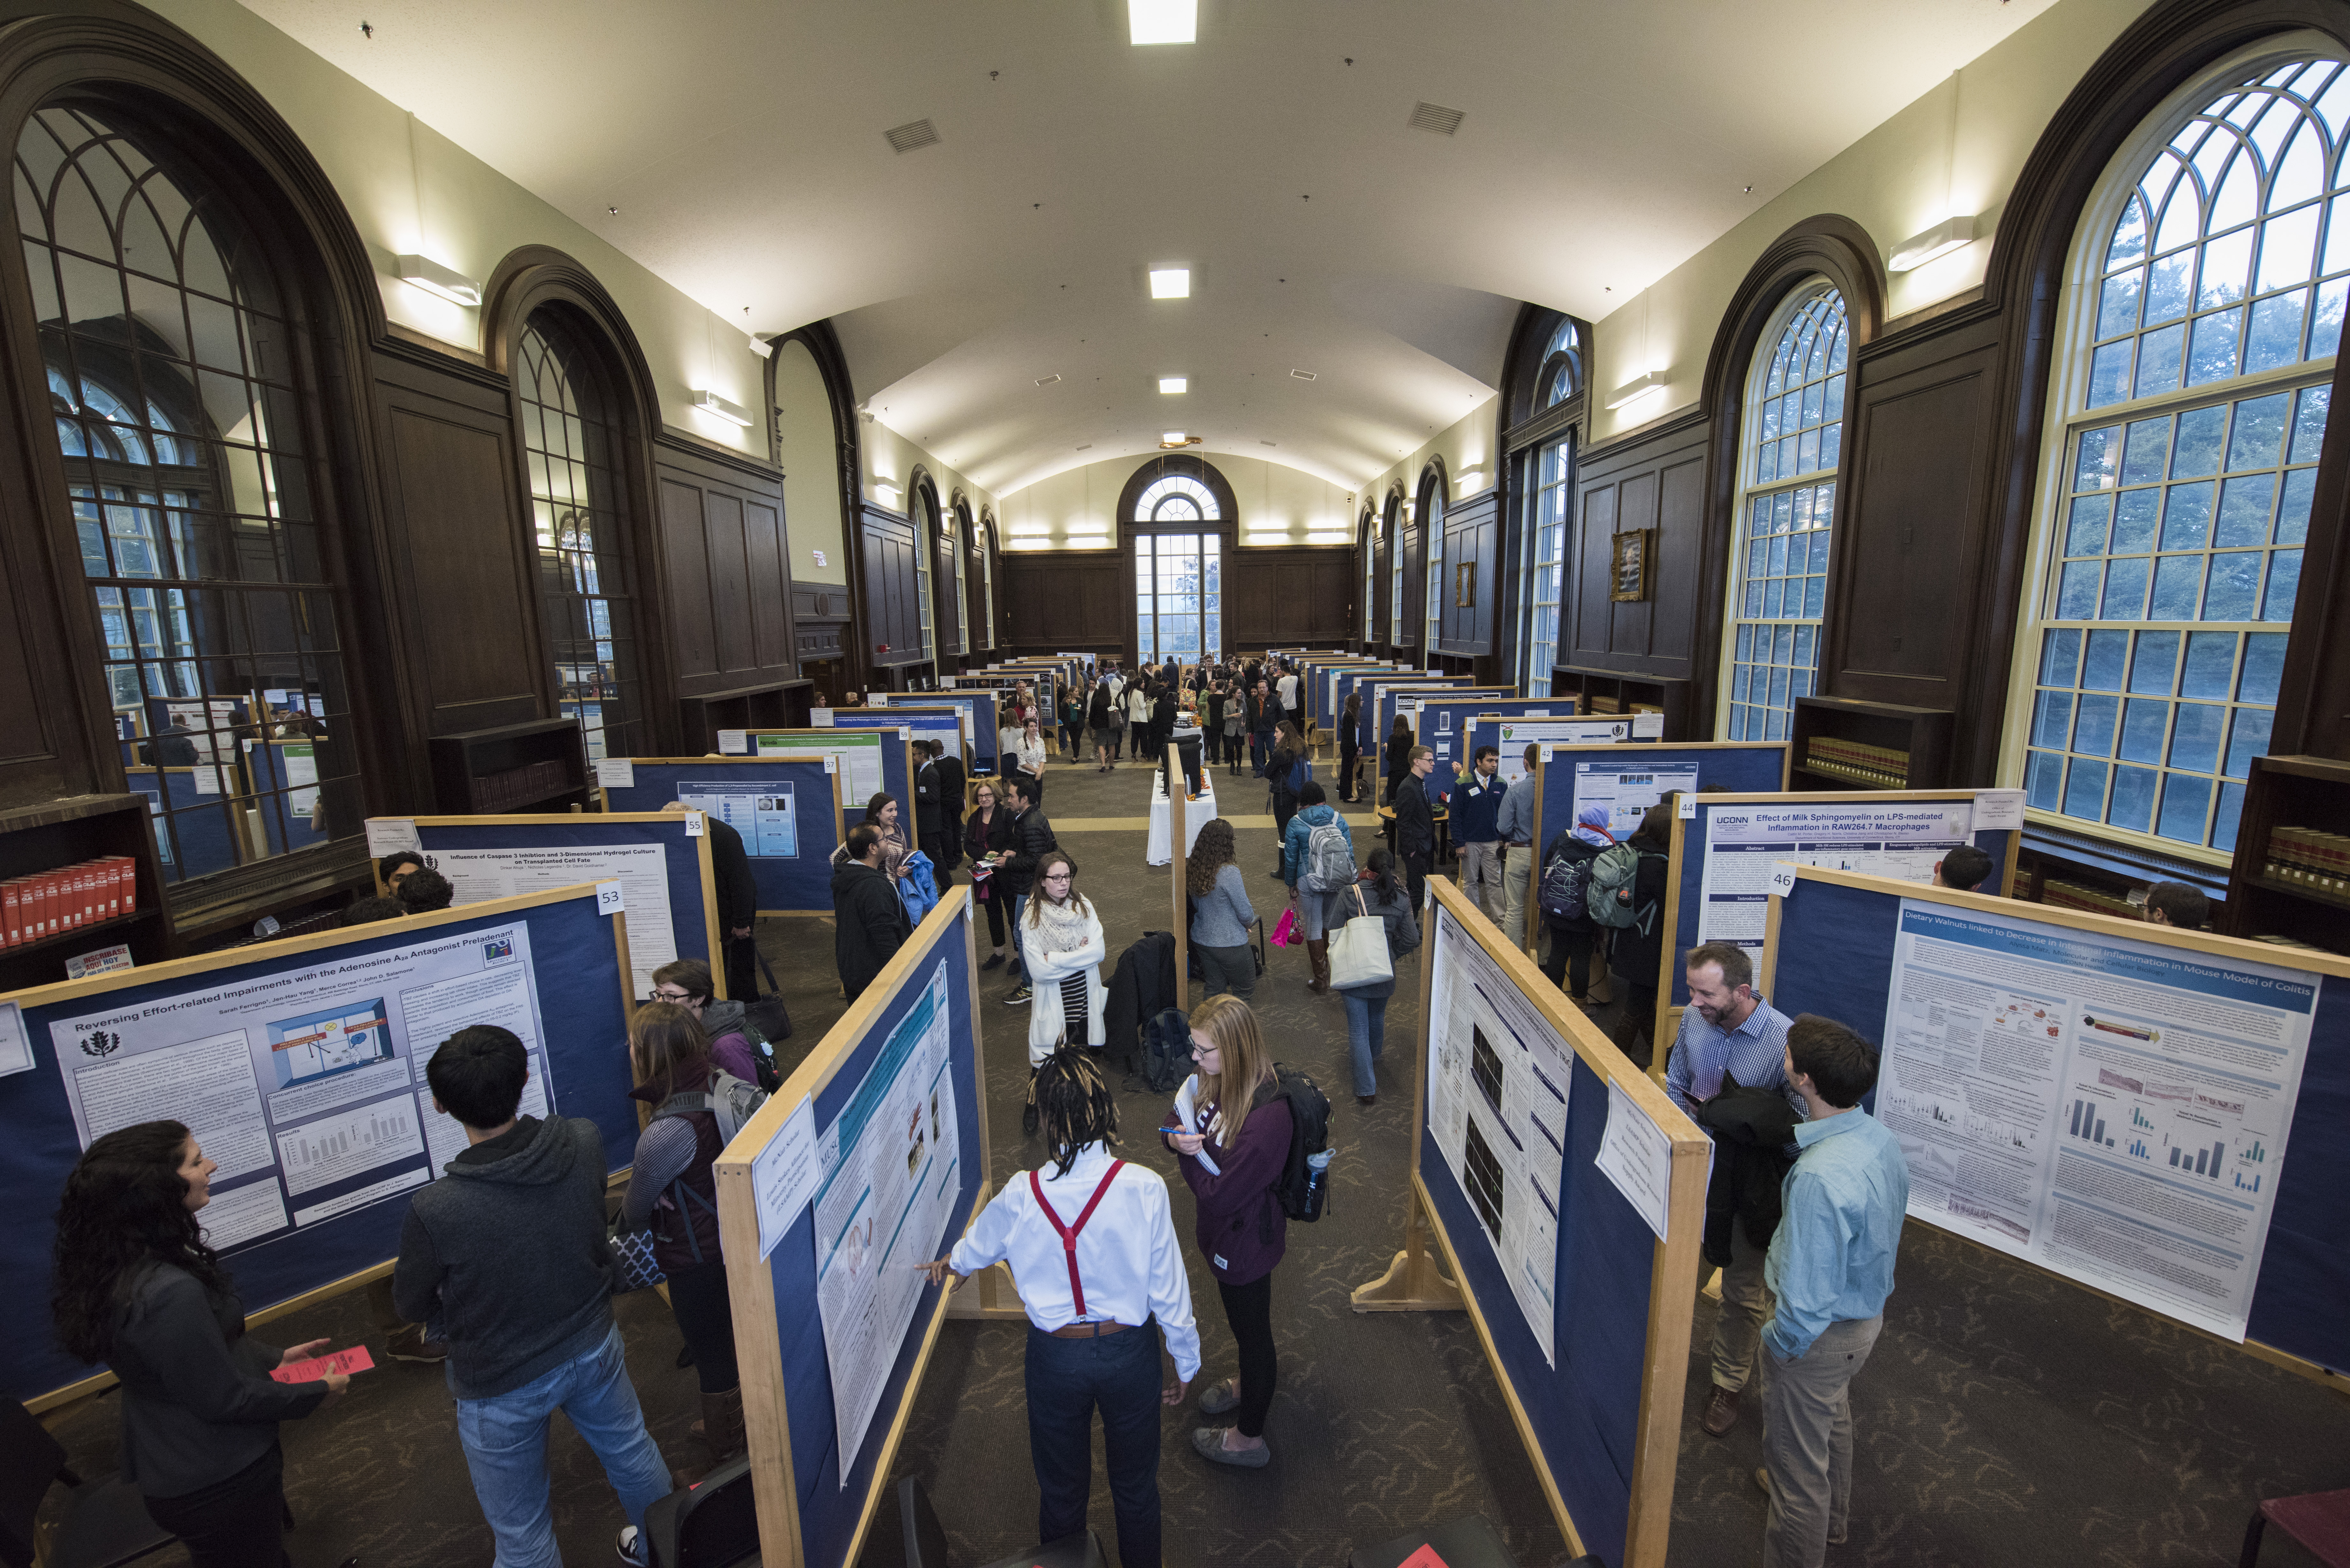 The Fall Frontiers in Undergraduate Research Poster Exhibition in Wilbur Cross South Reading Room on Oct. 26, 2016. (Ryan Glista '16 (CLAS)/UConn Photo)